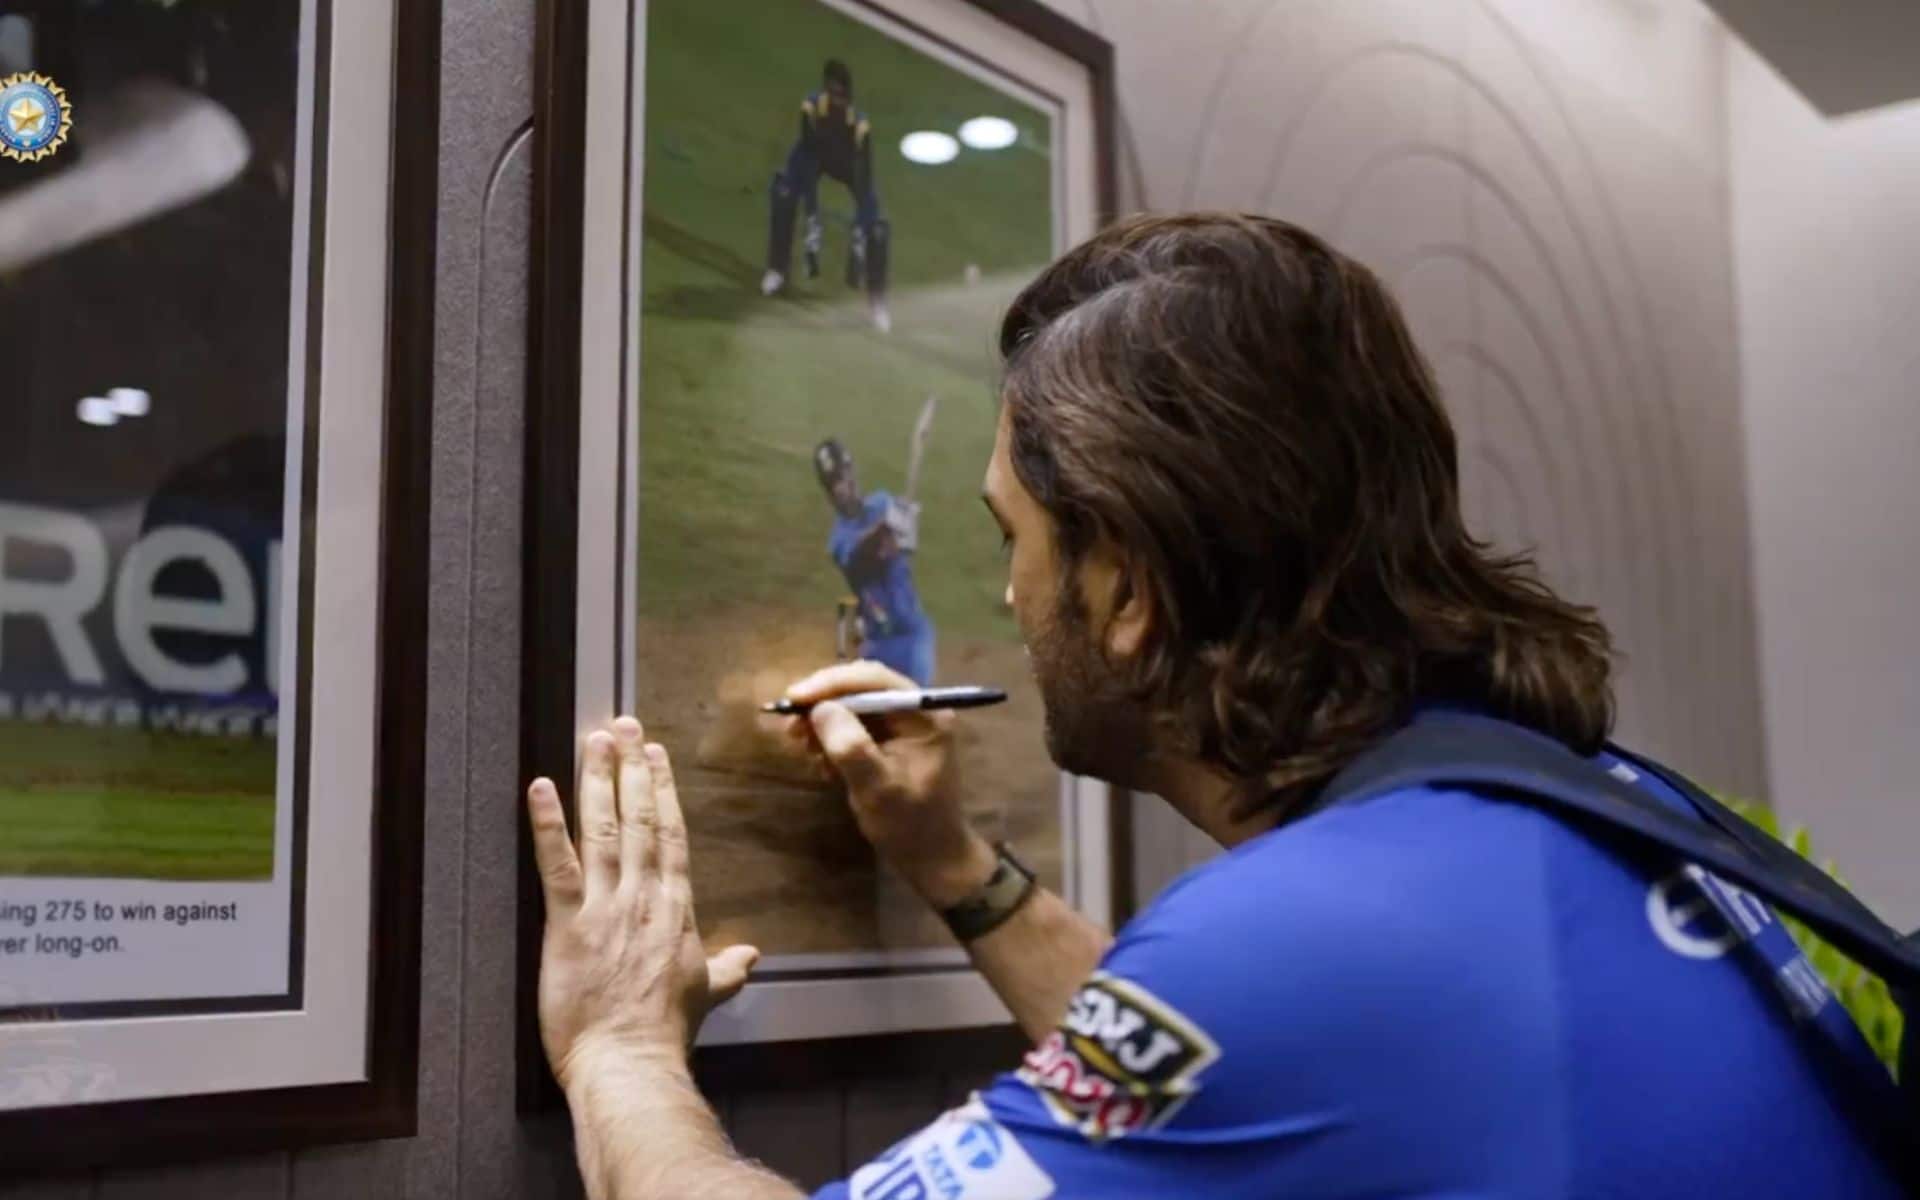 MS Dhoni Visits BCCI Museum To Sign His WC Winning Photo, Poses With ICC Trophies